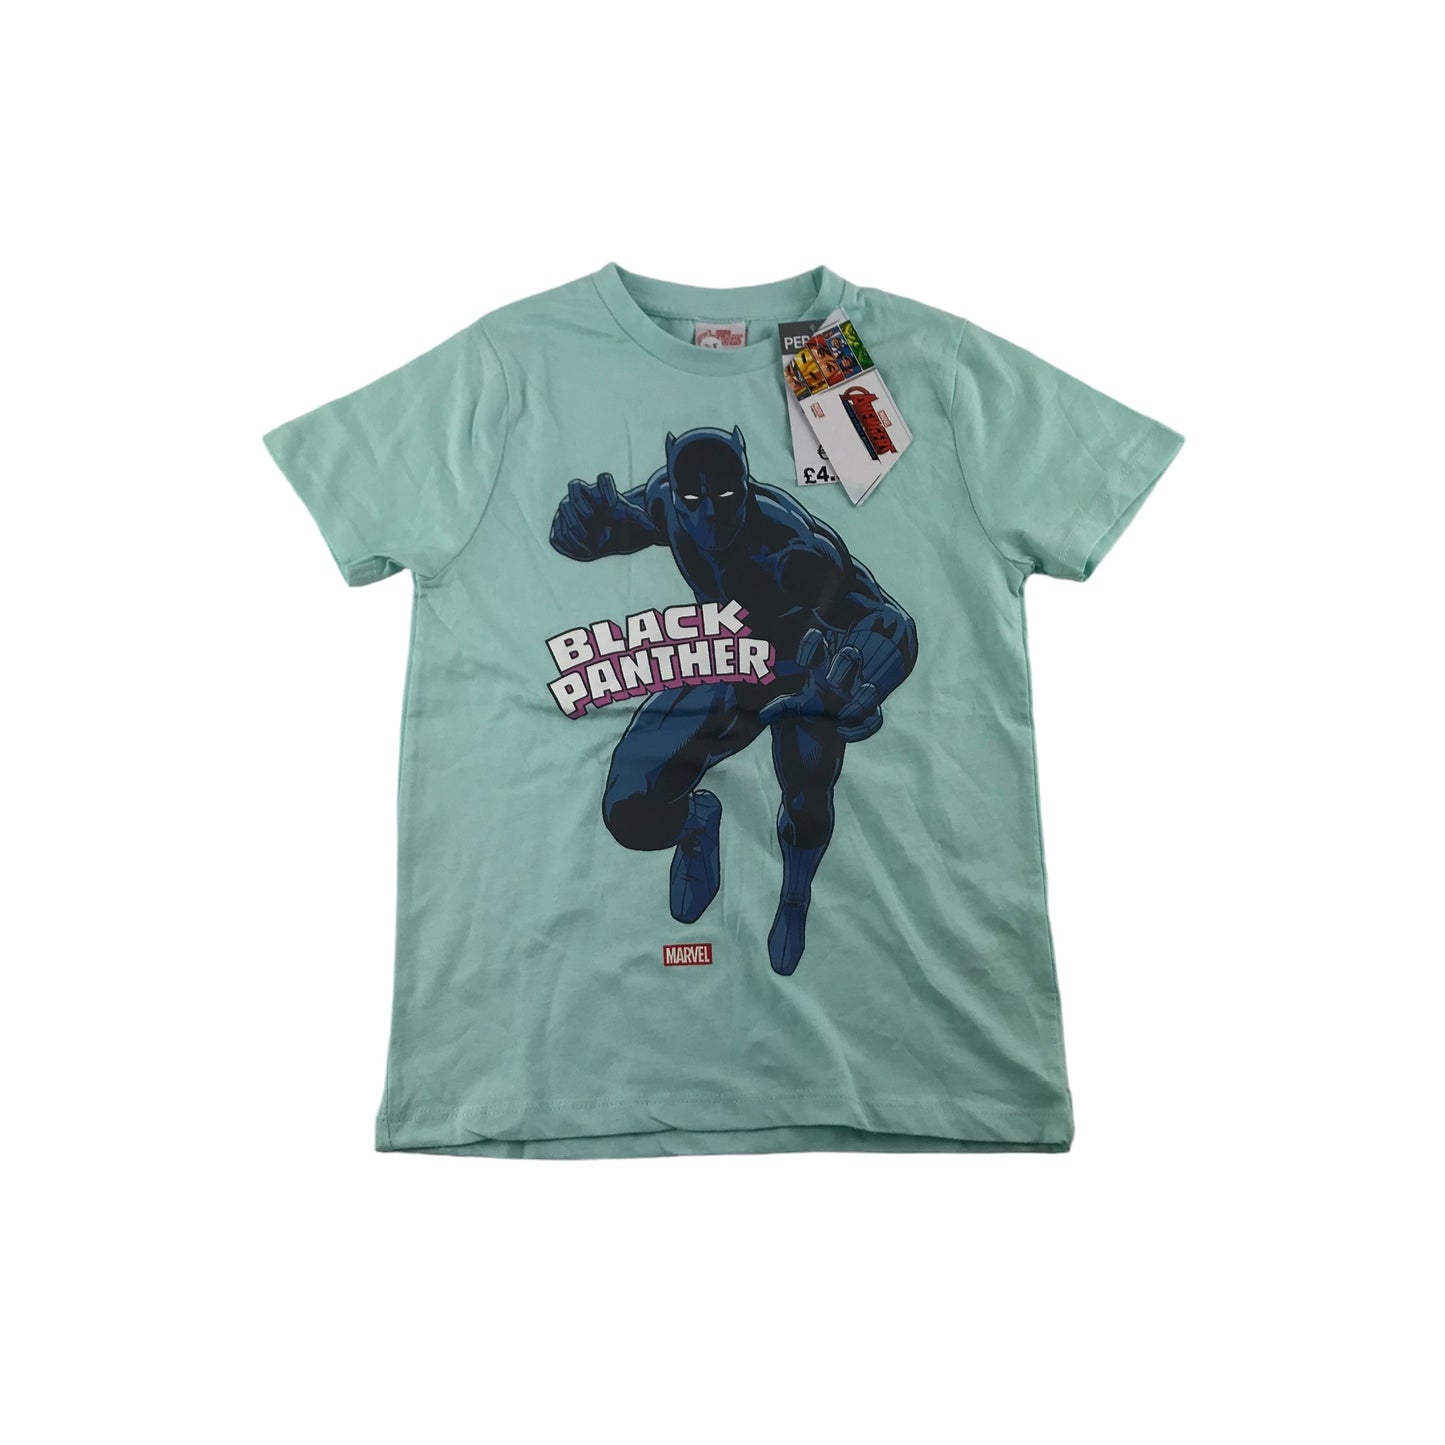 PEP&Co T-Shirt Age 7 Light Blue Short Sleeve Black Panther Graphic